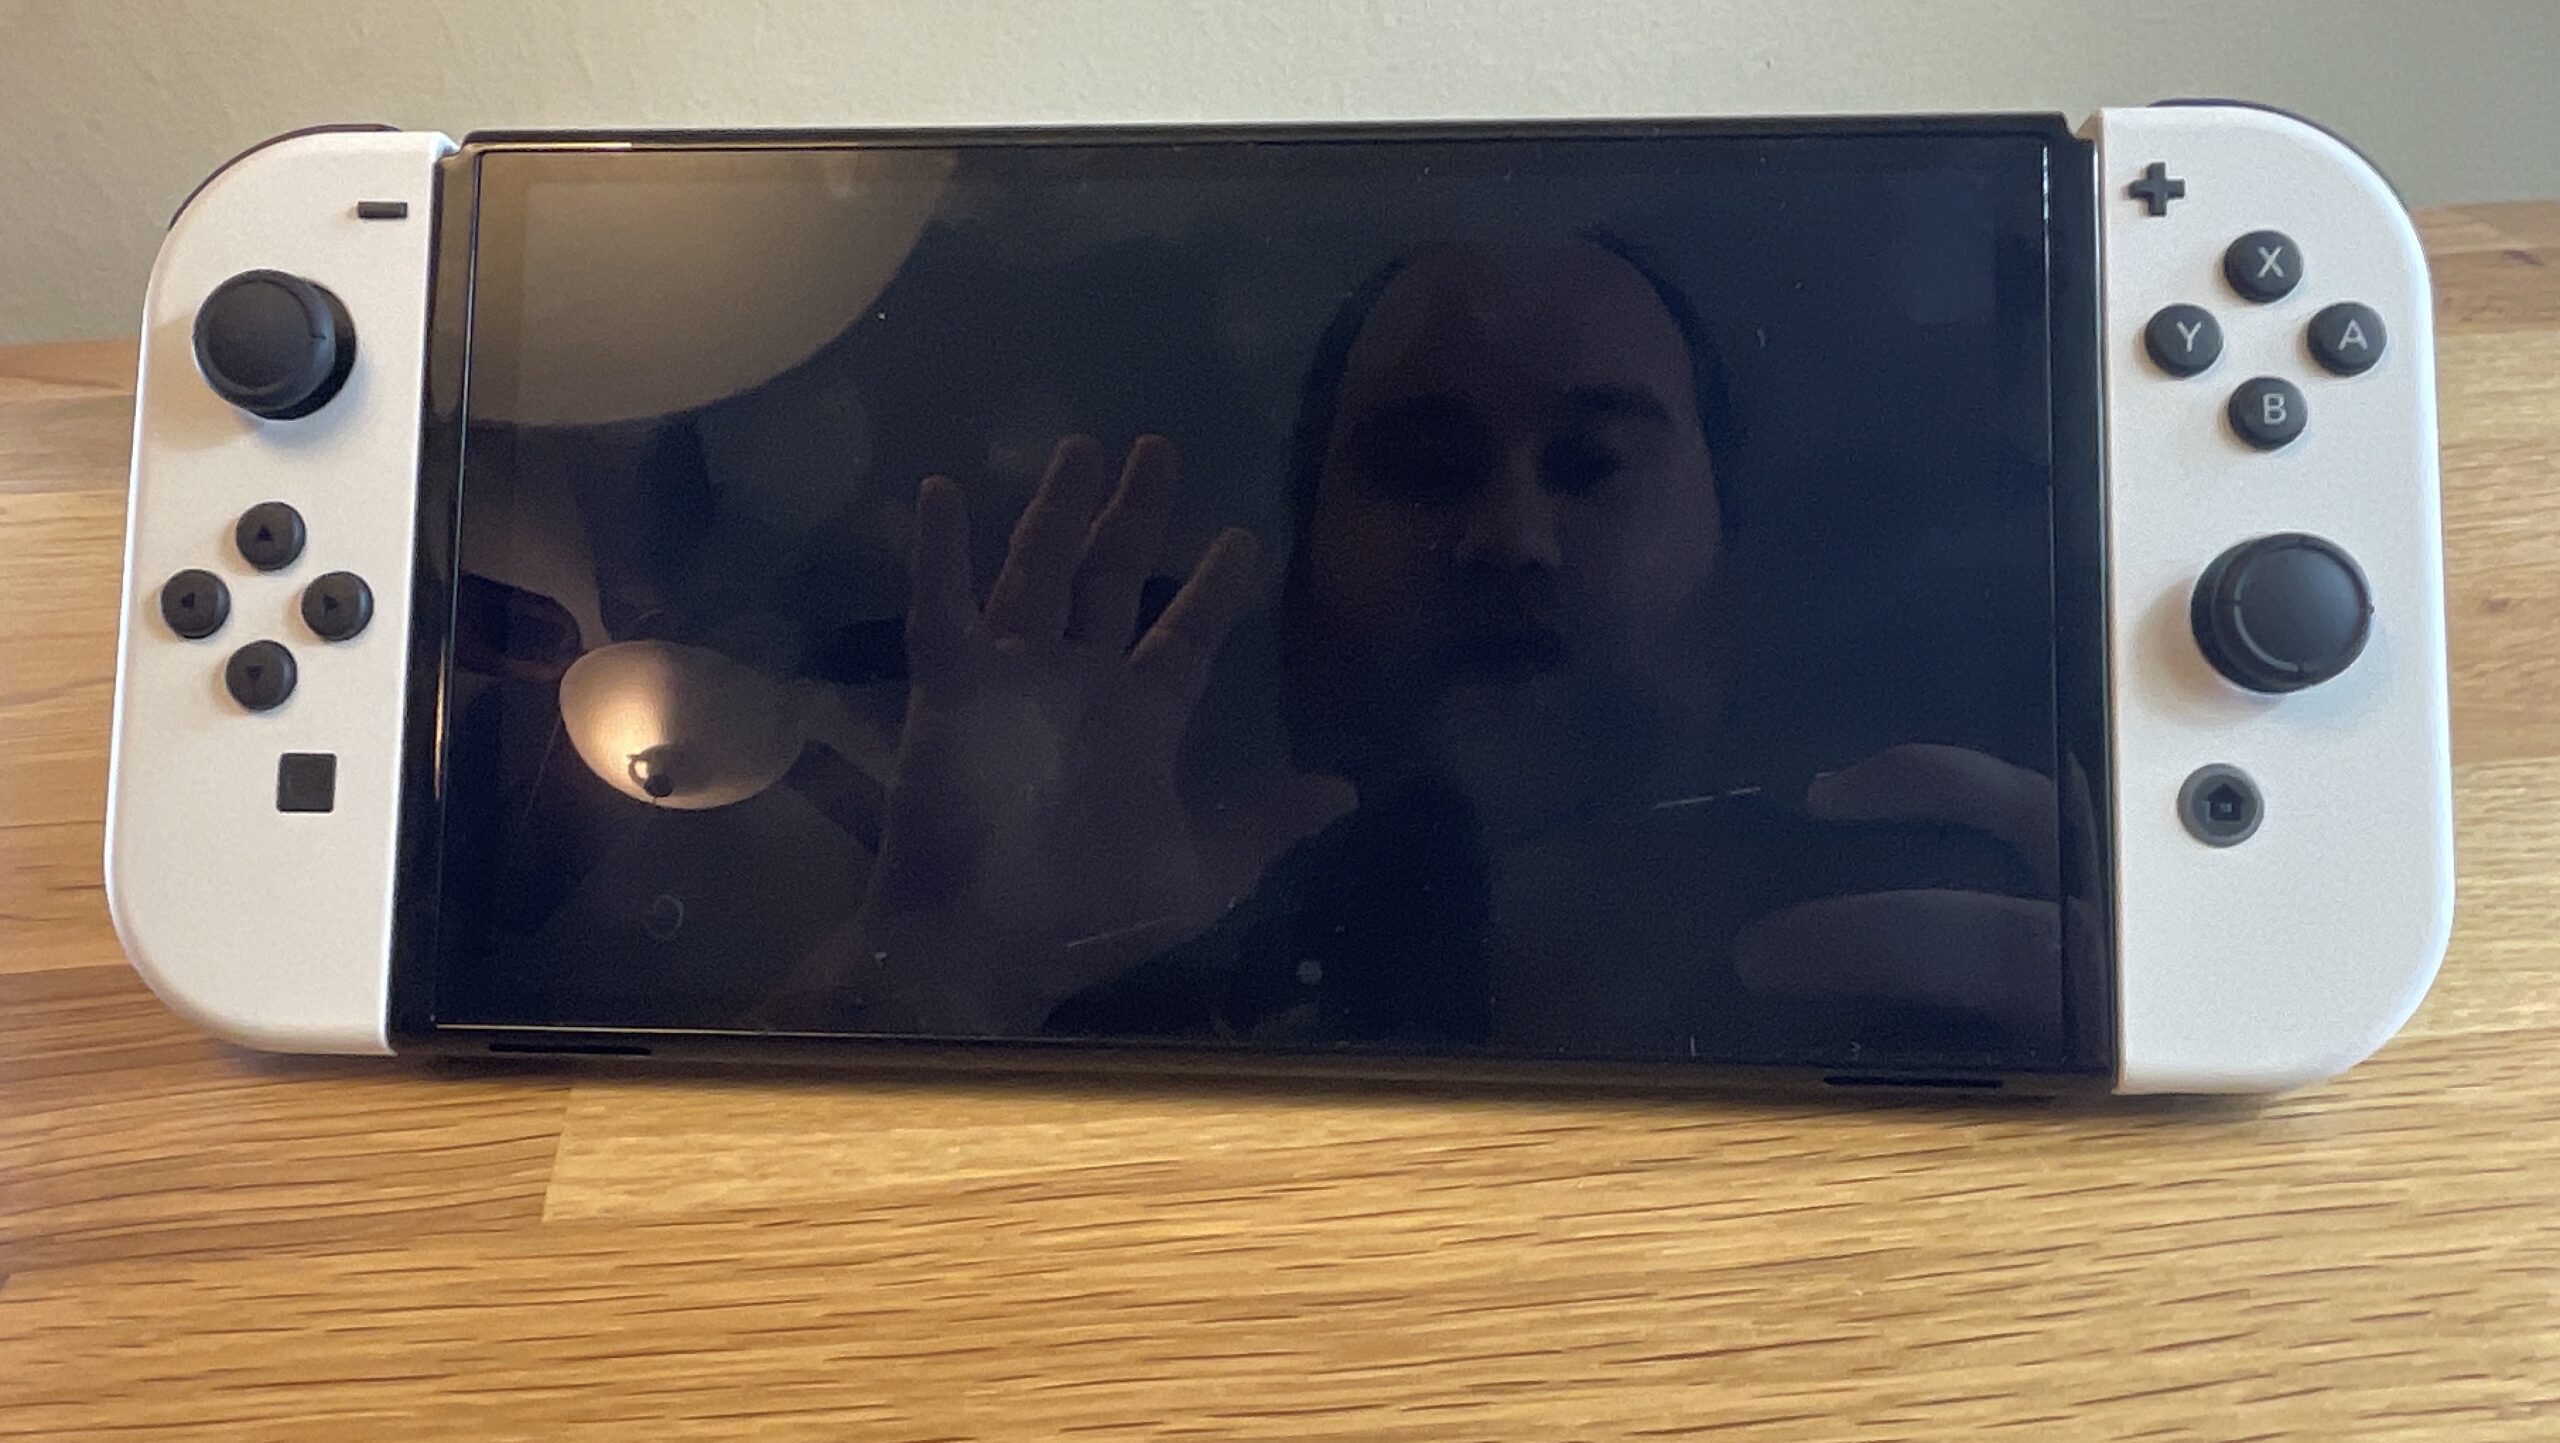 Nintendo Switch OLED Review - The Screen's The Star